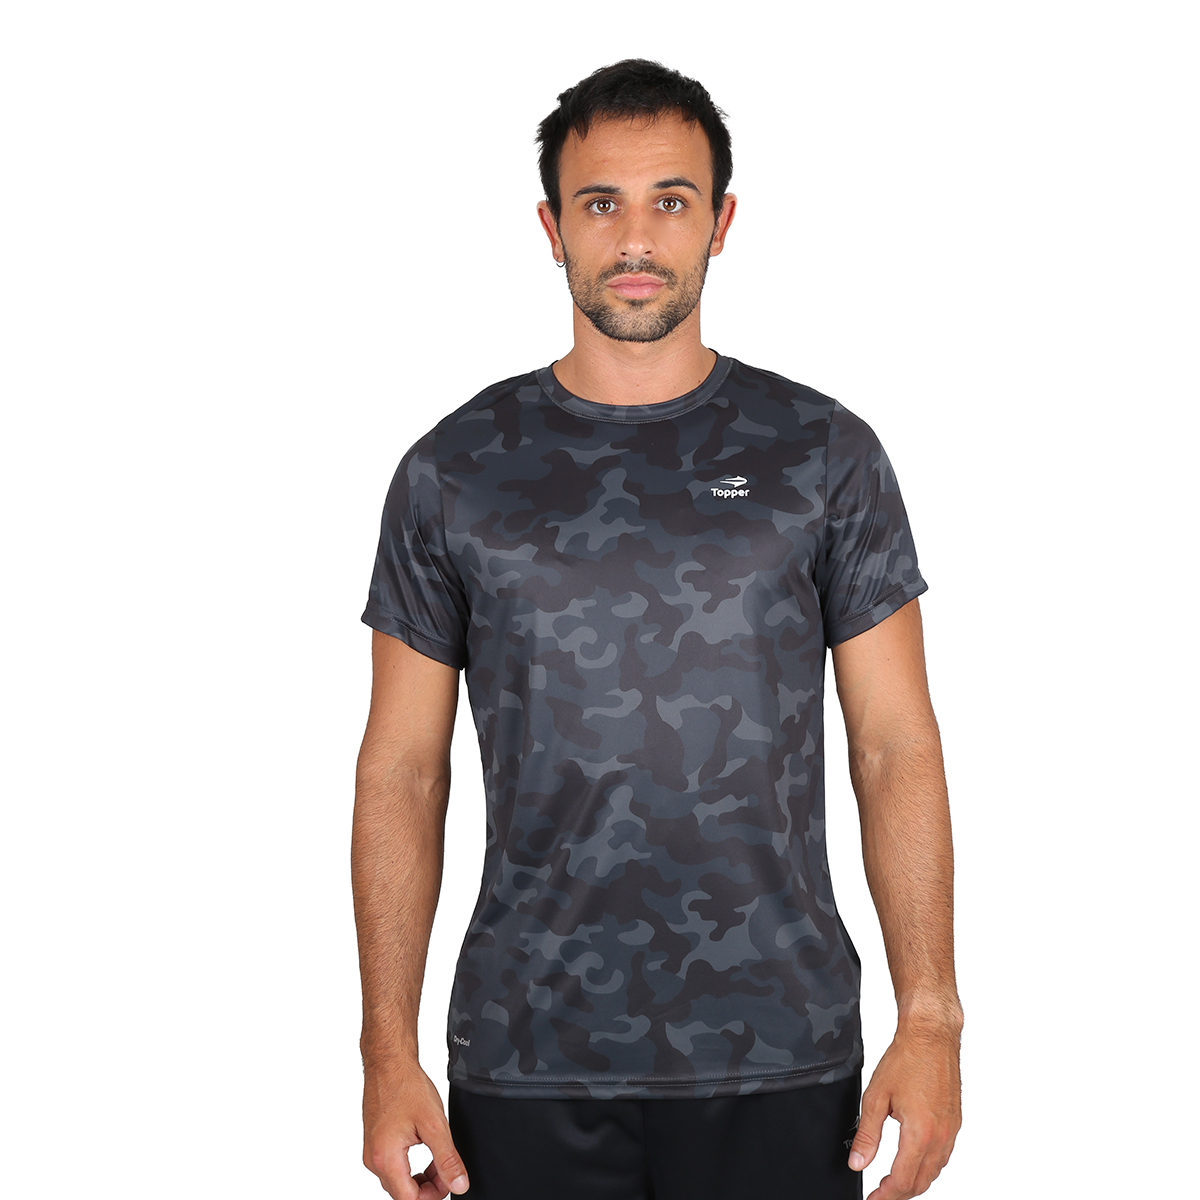 Remera Entrenamiento Topper Full Print Hombre,  image number null